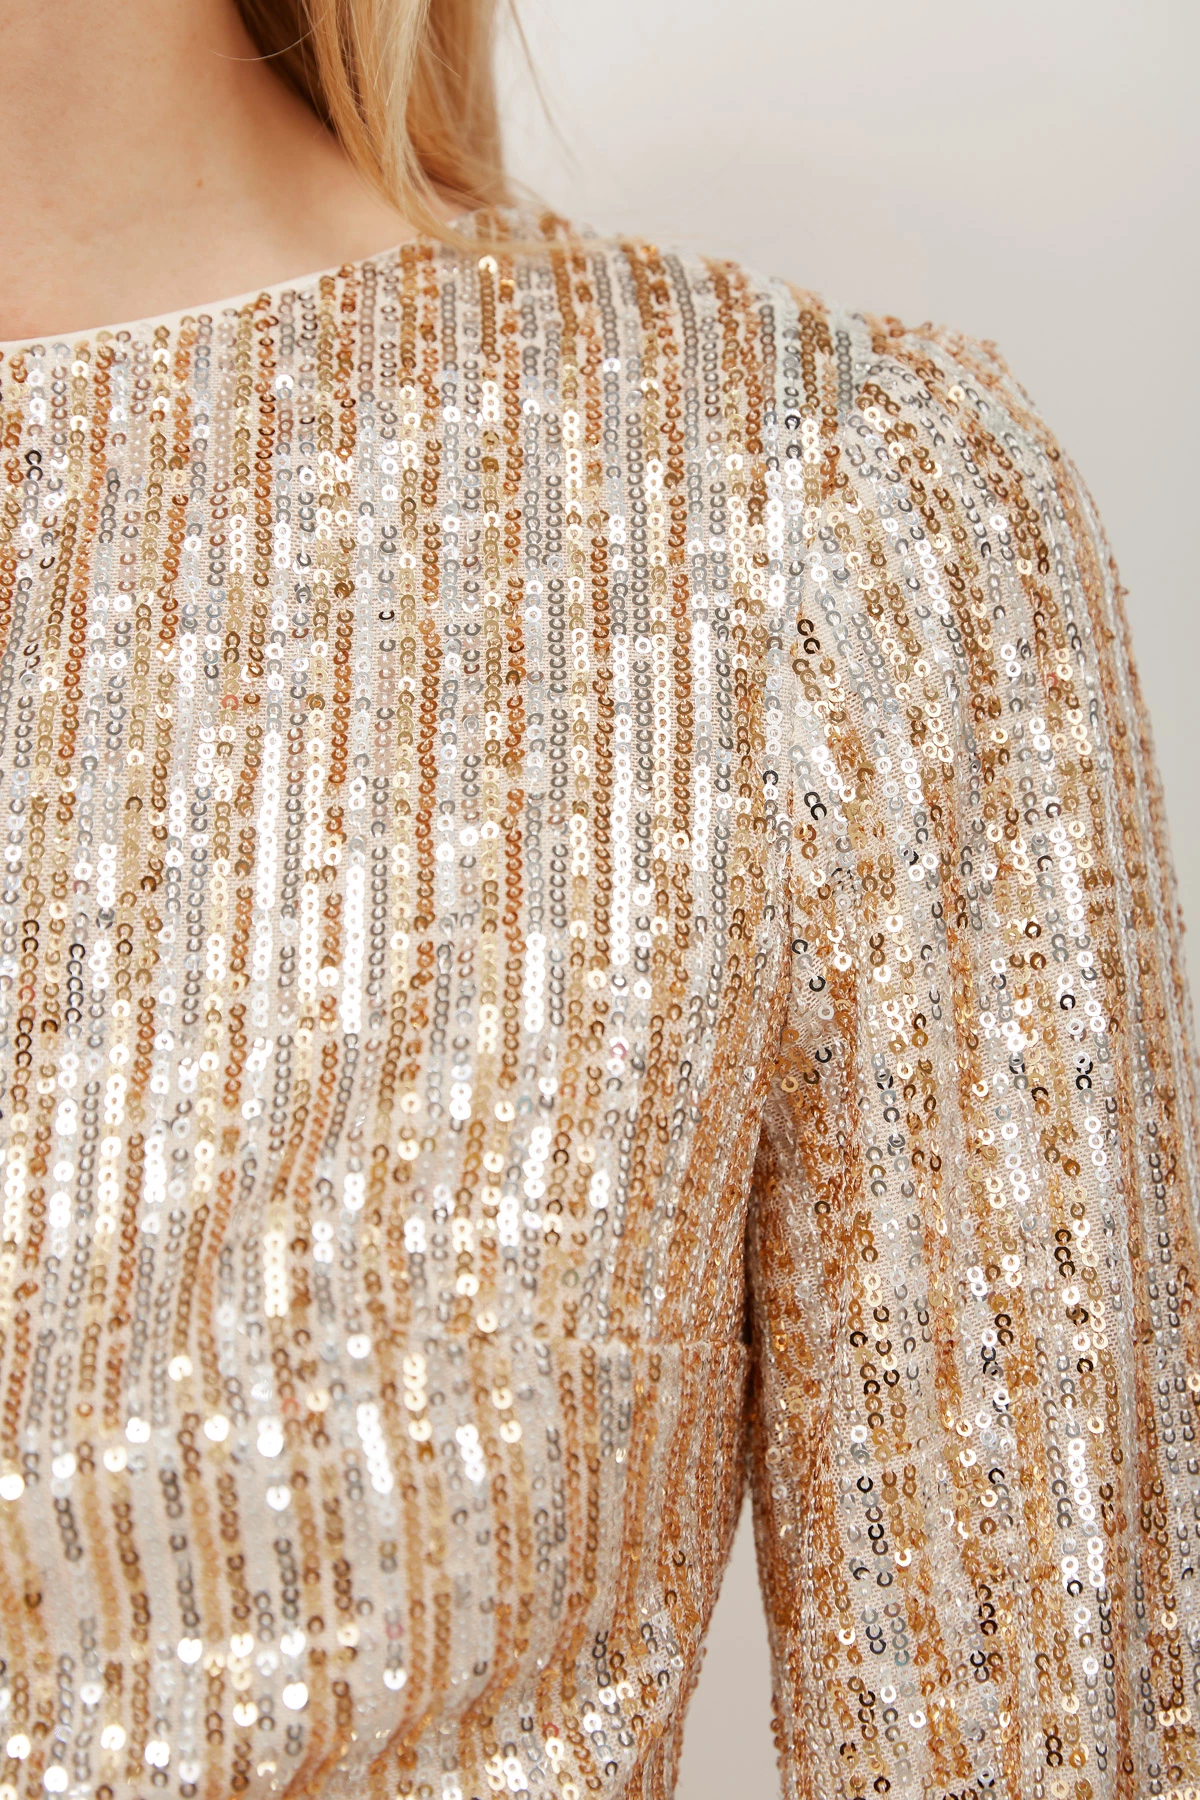 Short dress in sequins of silver-gold color, photo 4